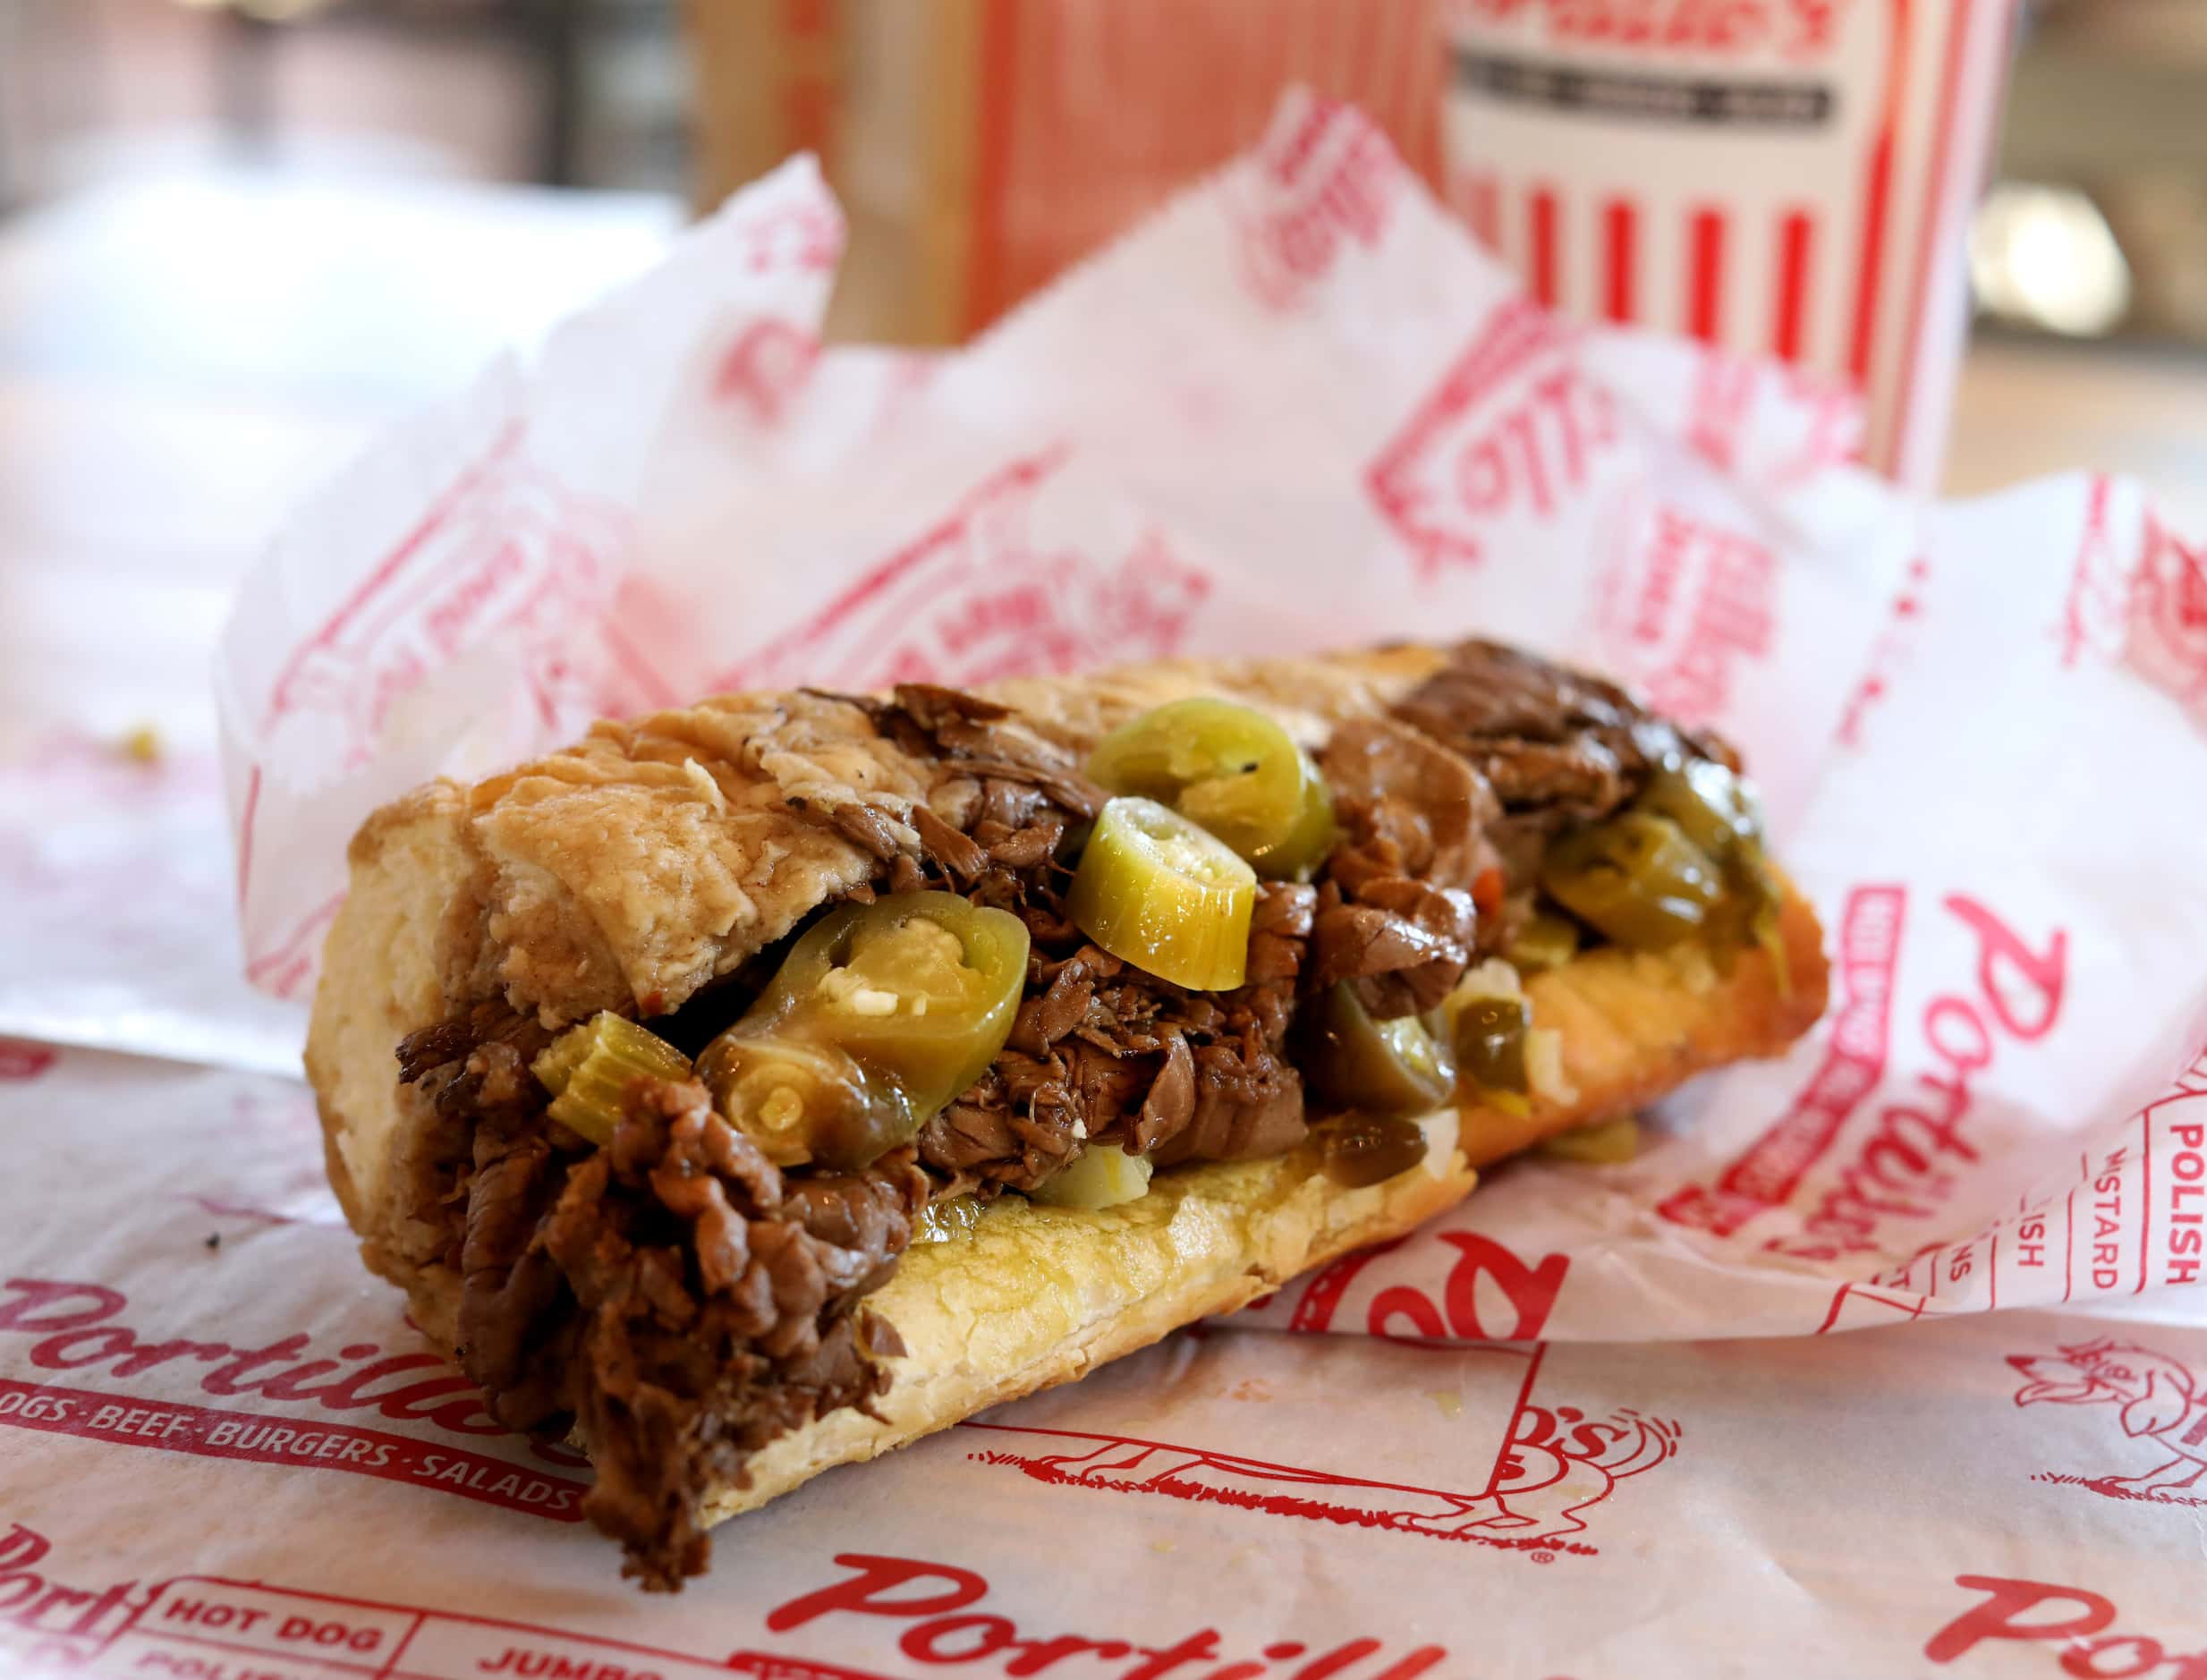 A top seller at Portillo's is the Italian Beef sandwich.